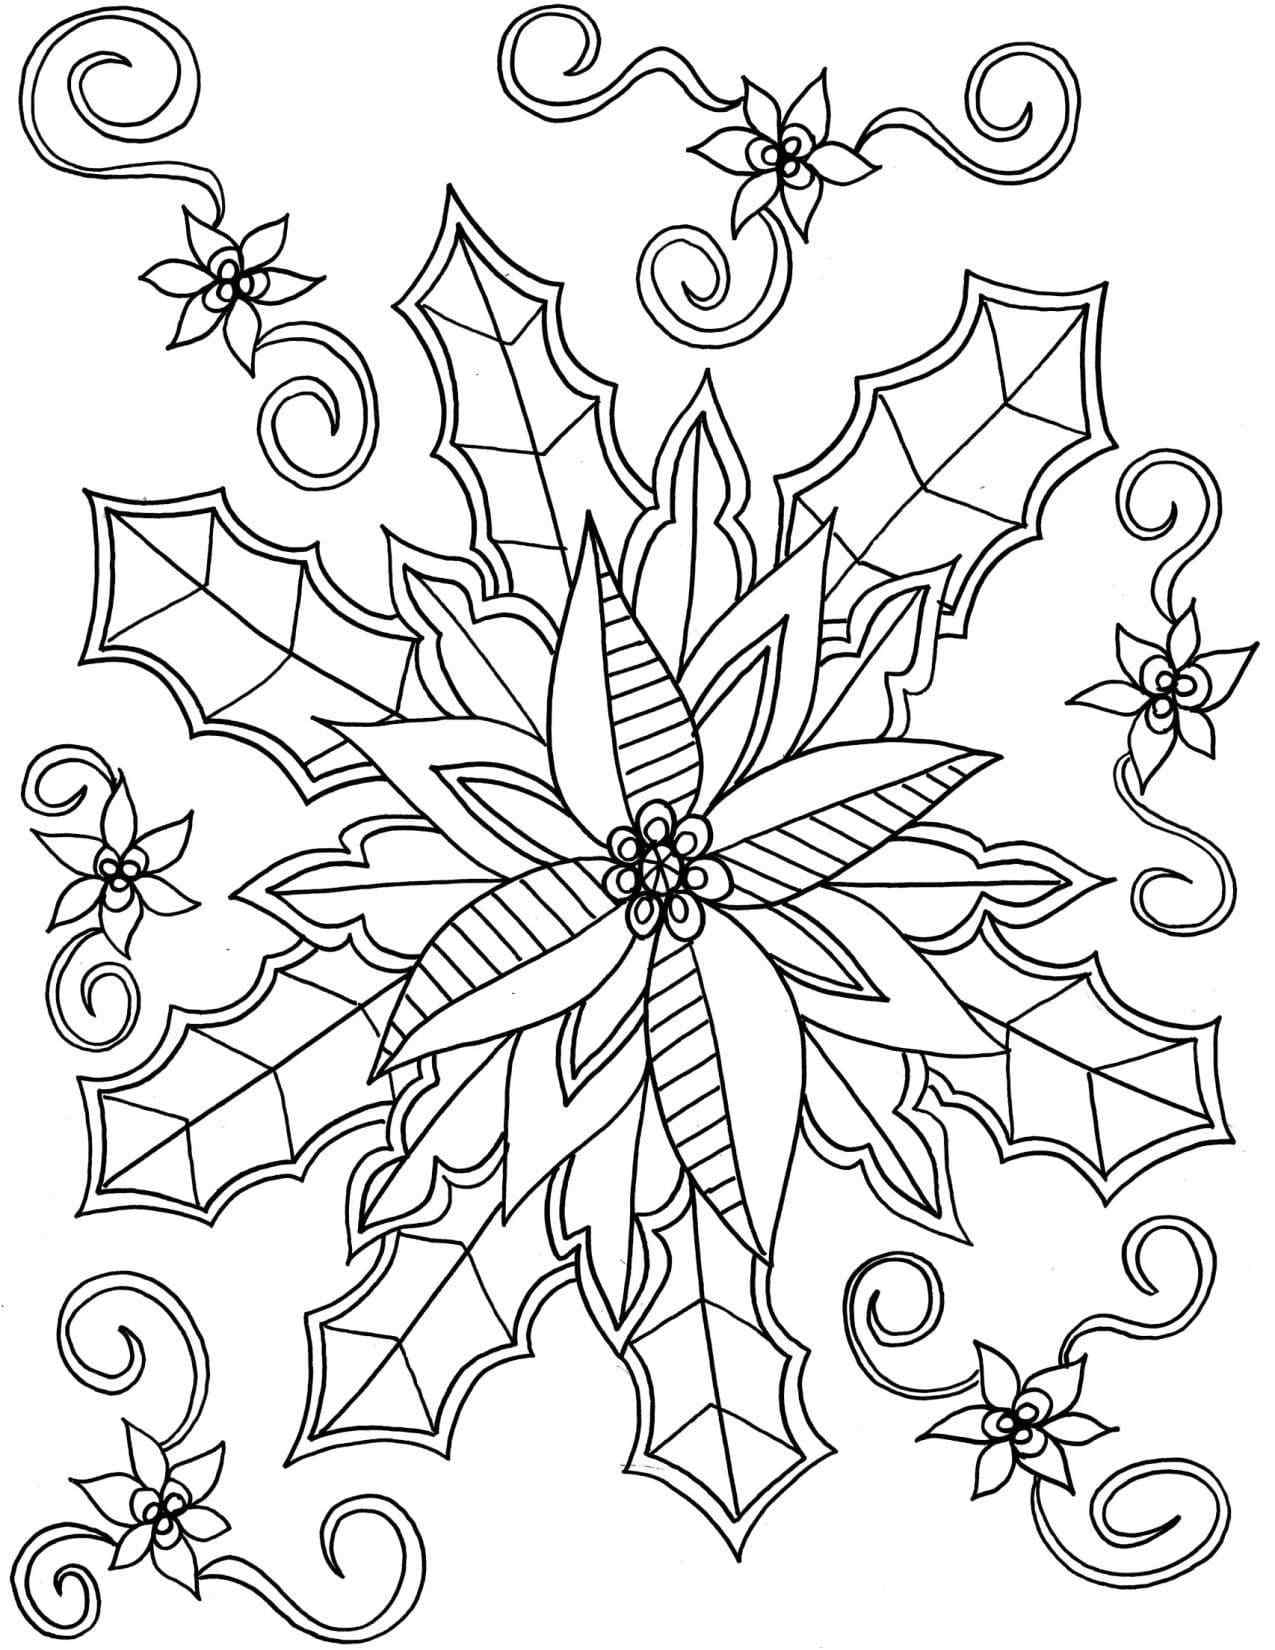 Christmas Flowers In The Ornament Coloring Page